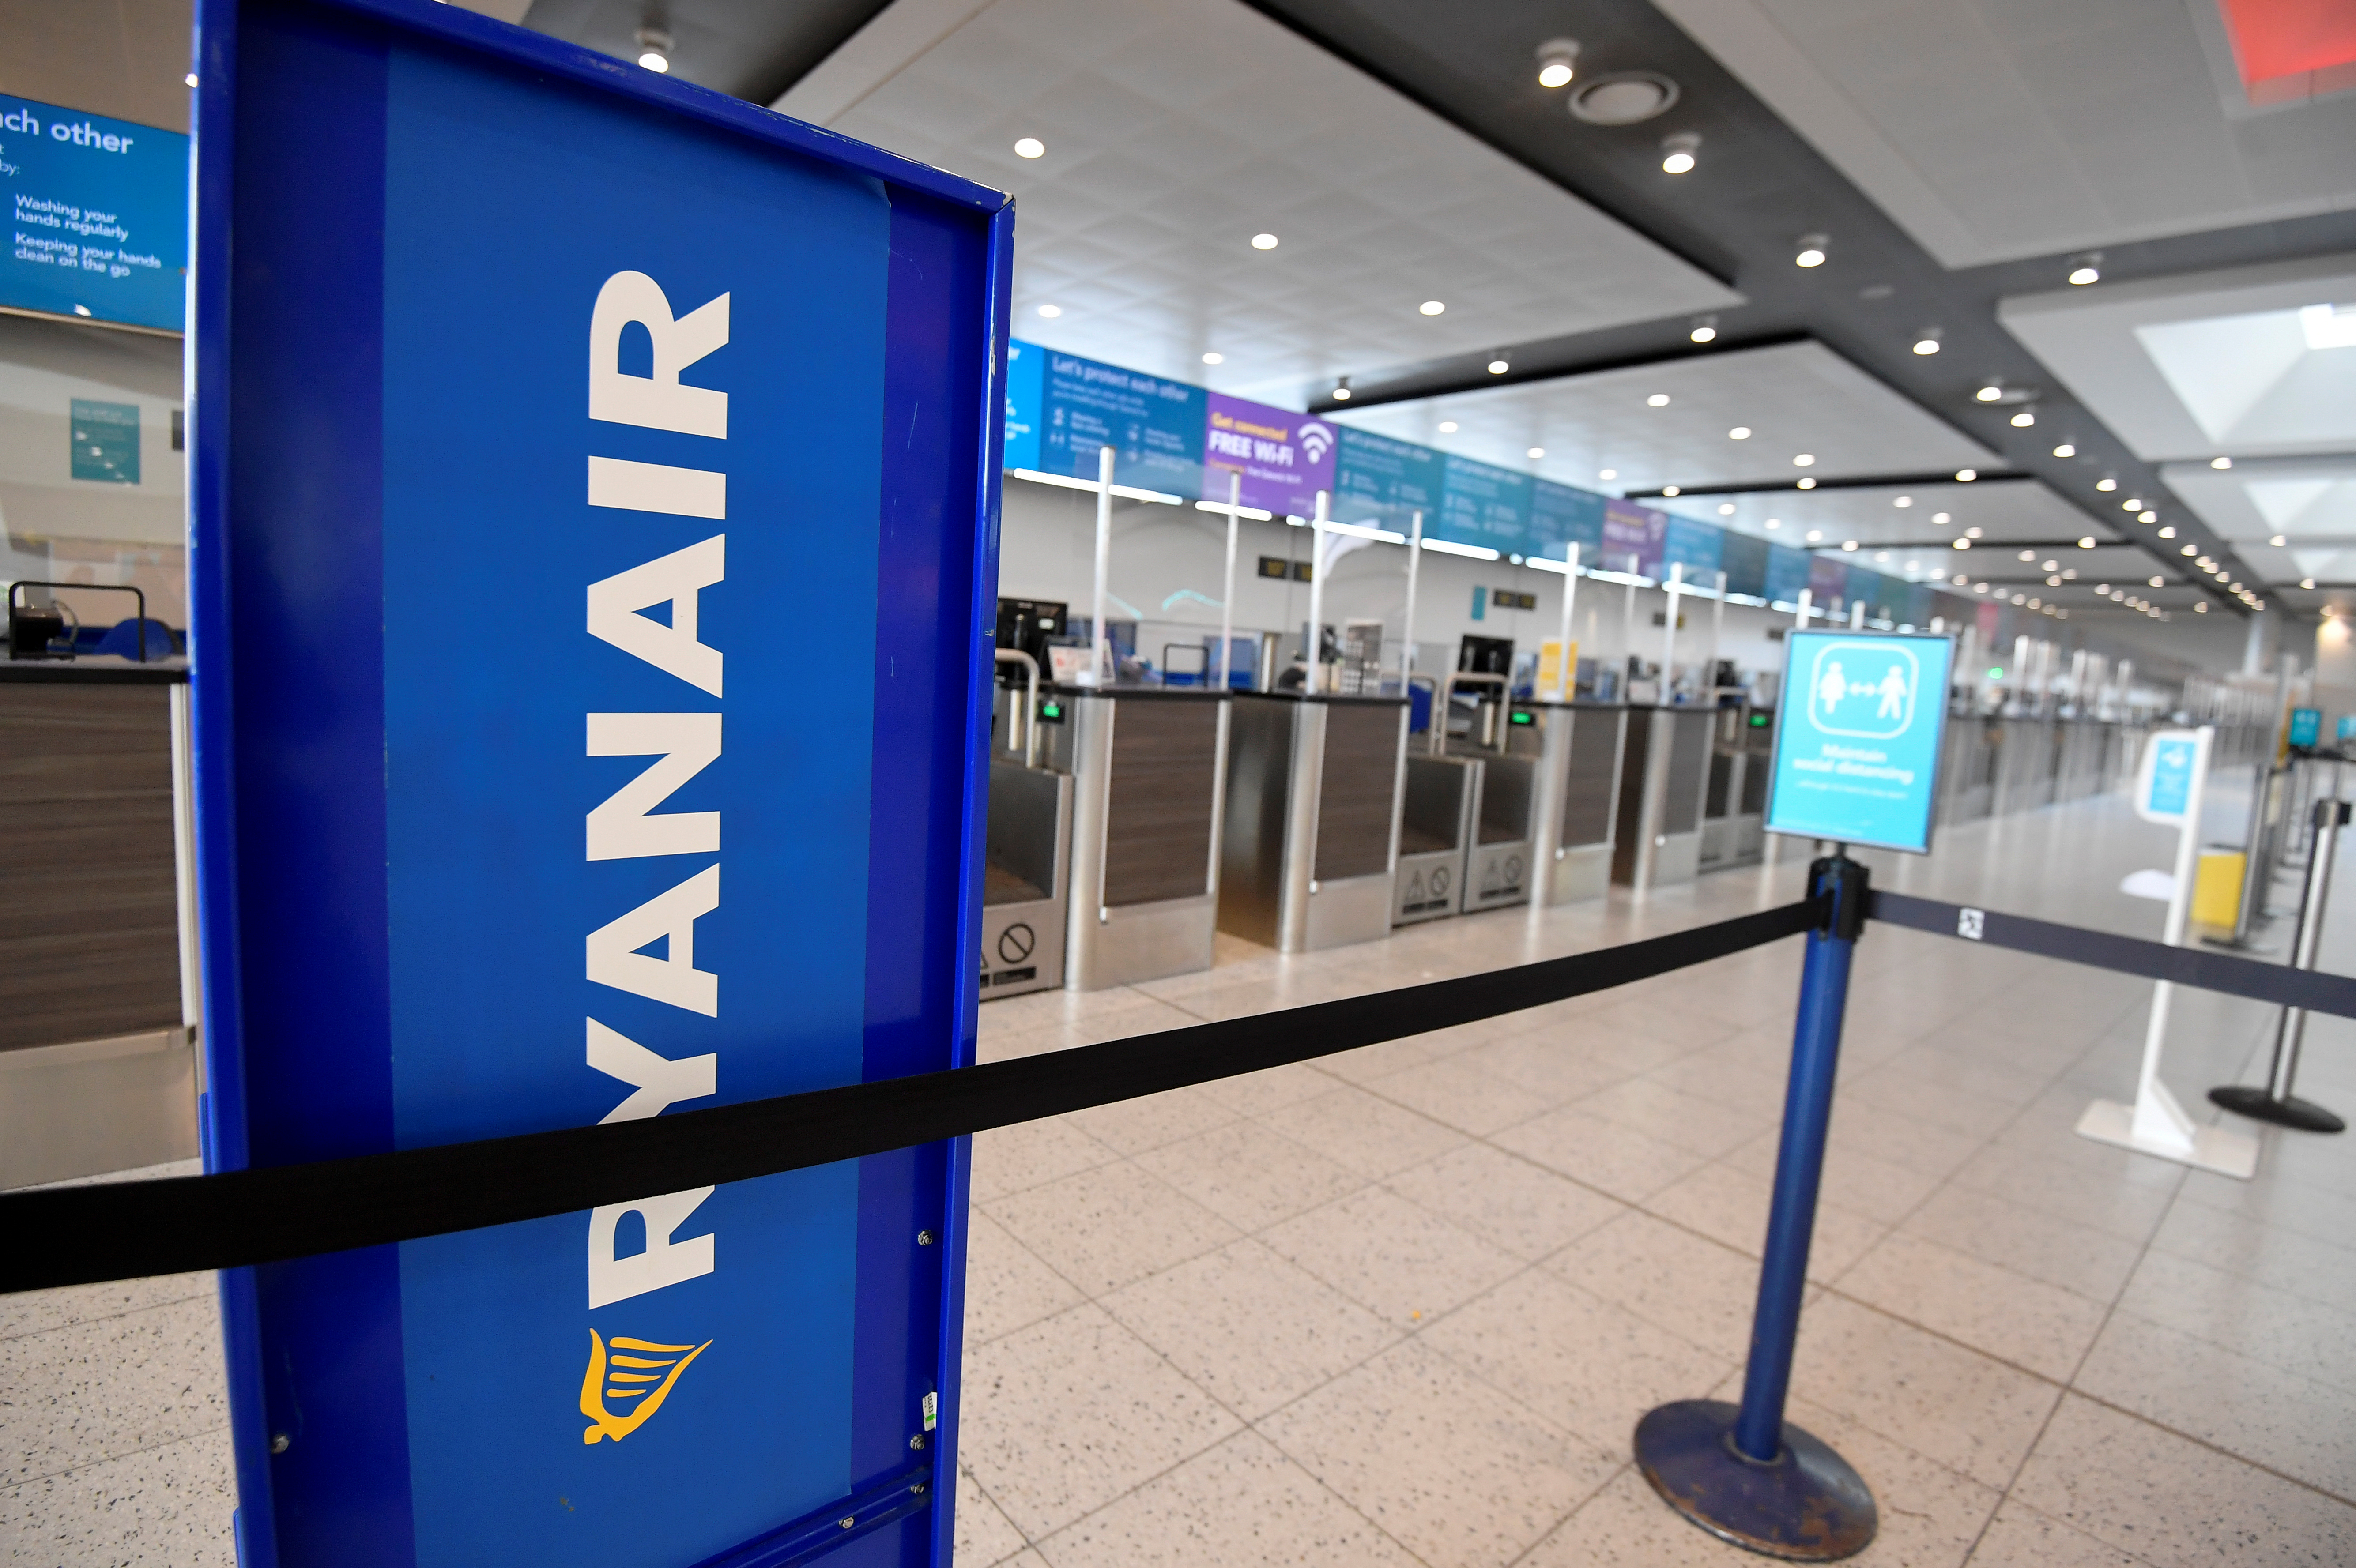 Ryanair sign is seen at the check-in area at Gatwick Airport, as travel restrictions are eased following the coronavirus disease (COVID-19) outbreak, in Gatwick, Britain July 10, 2020. REUTERS/Toby Melville